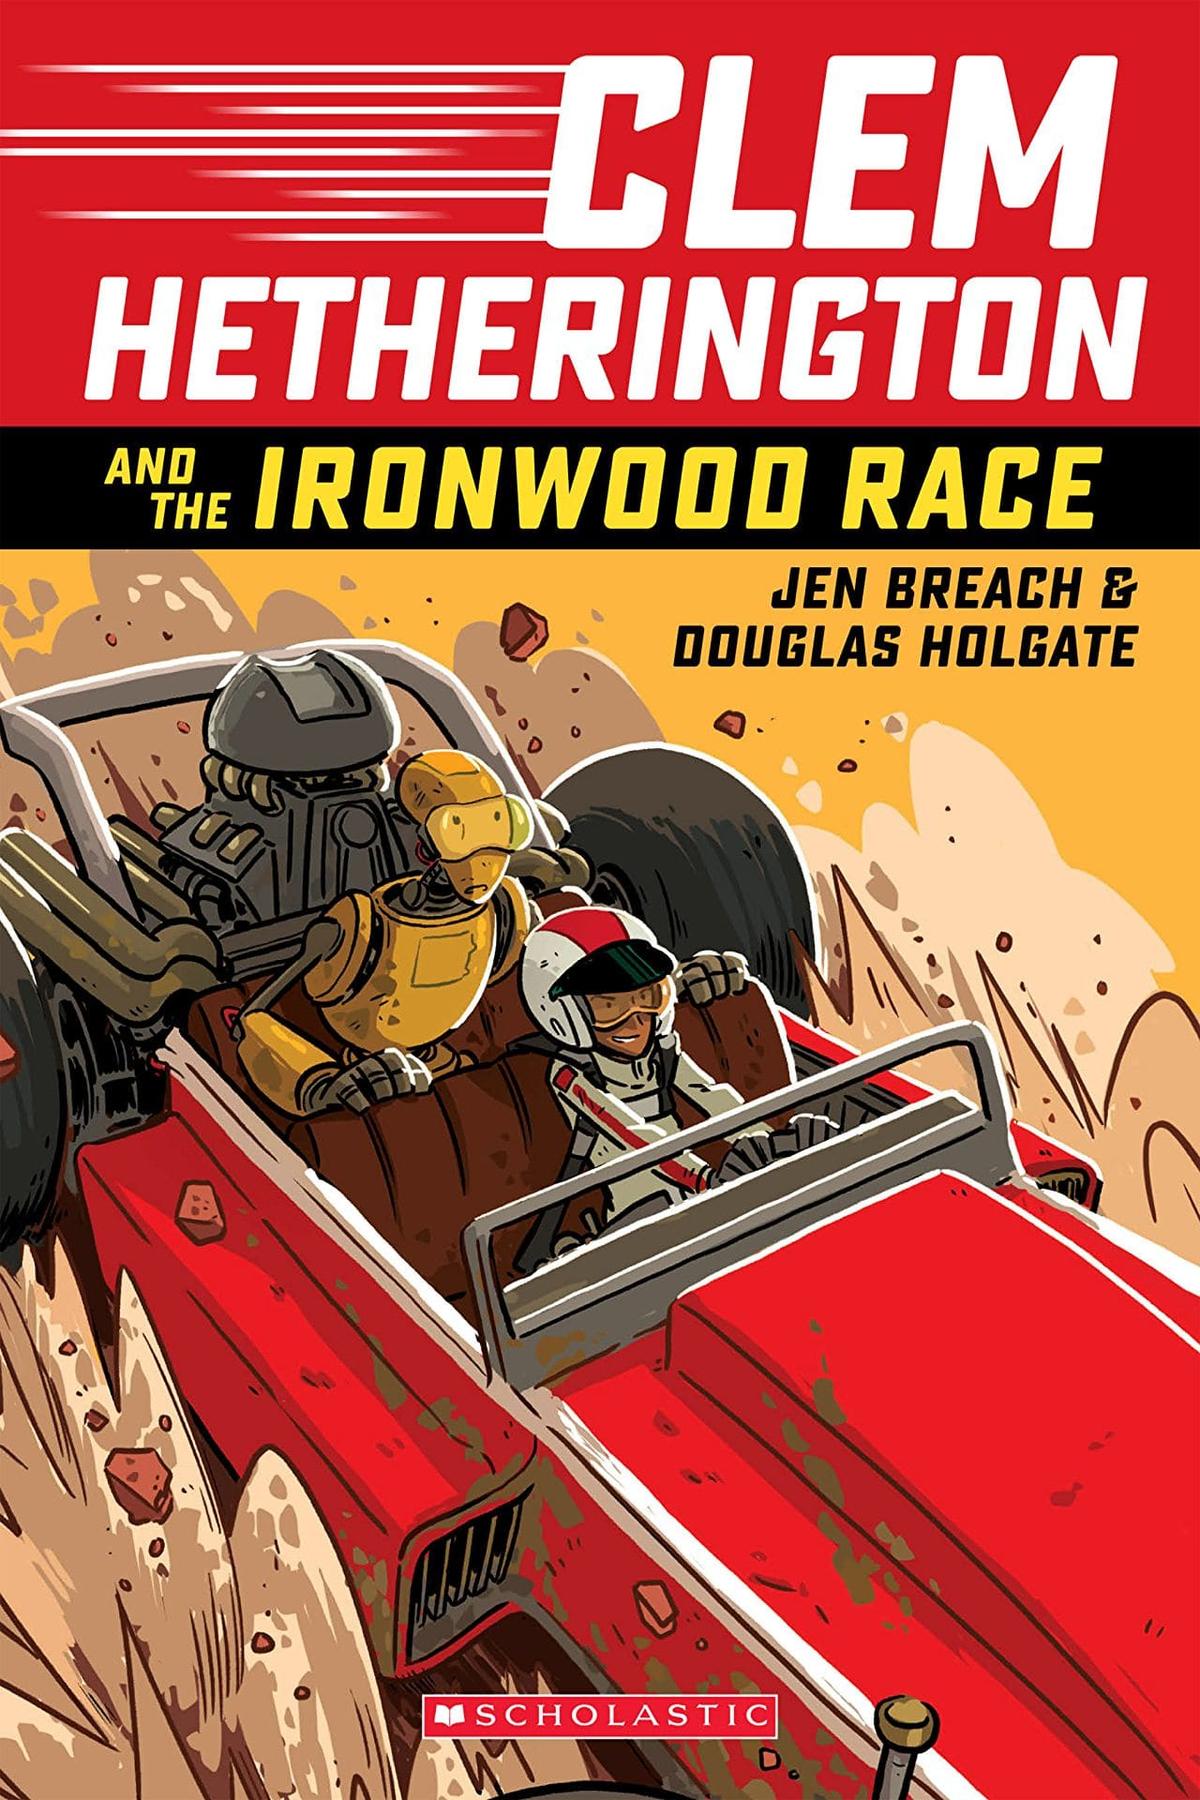 The front cover of Clem Hetherington and the Ironwood Race, depicting a young driver and her robot copilot blasting along a dusty racetrack in their hotrod rally car. - Image credit Cover illustration by Douglas Holgate